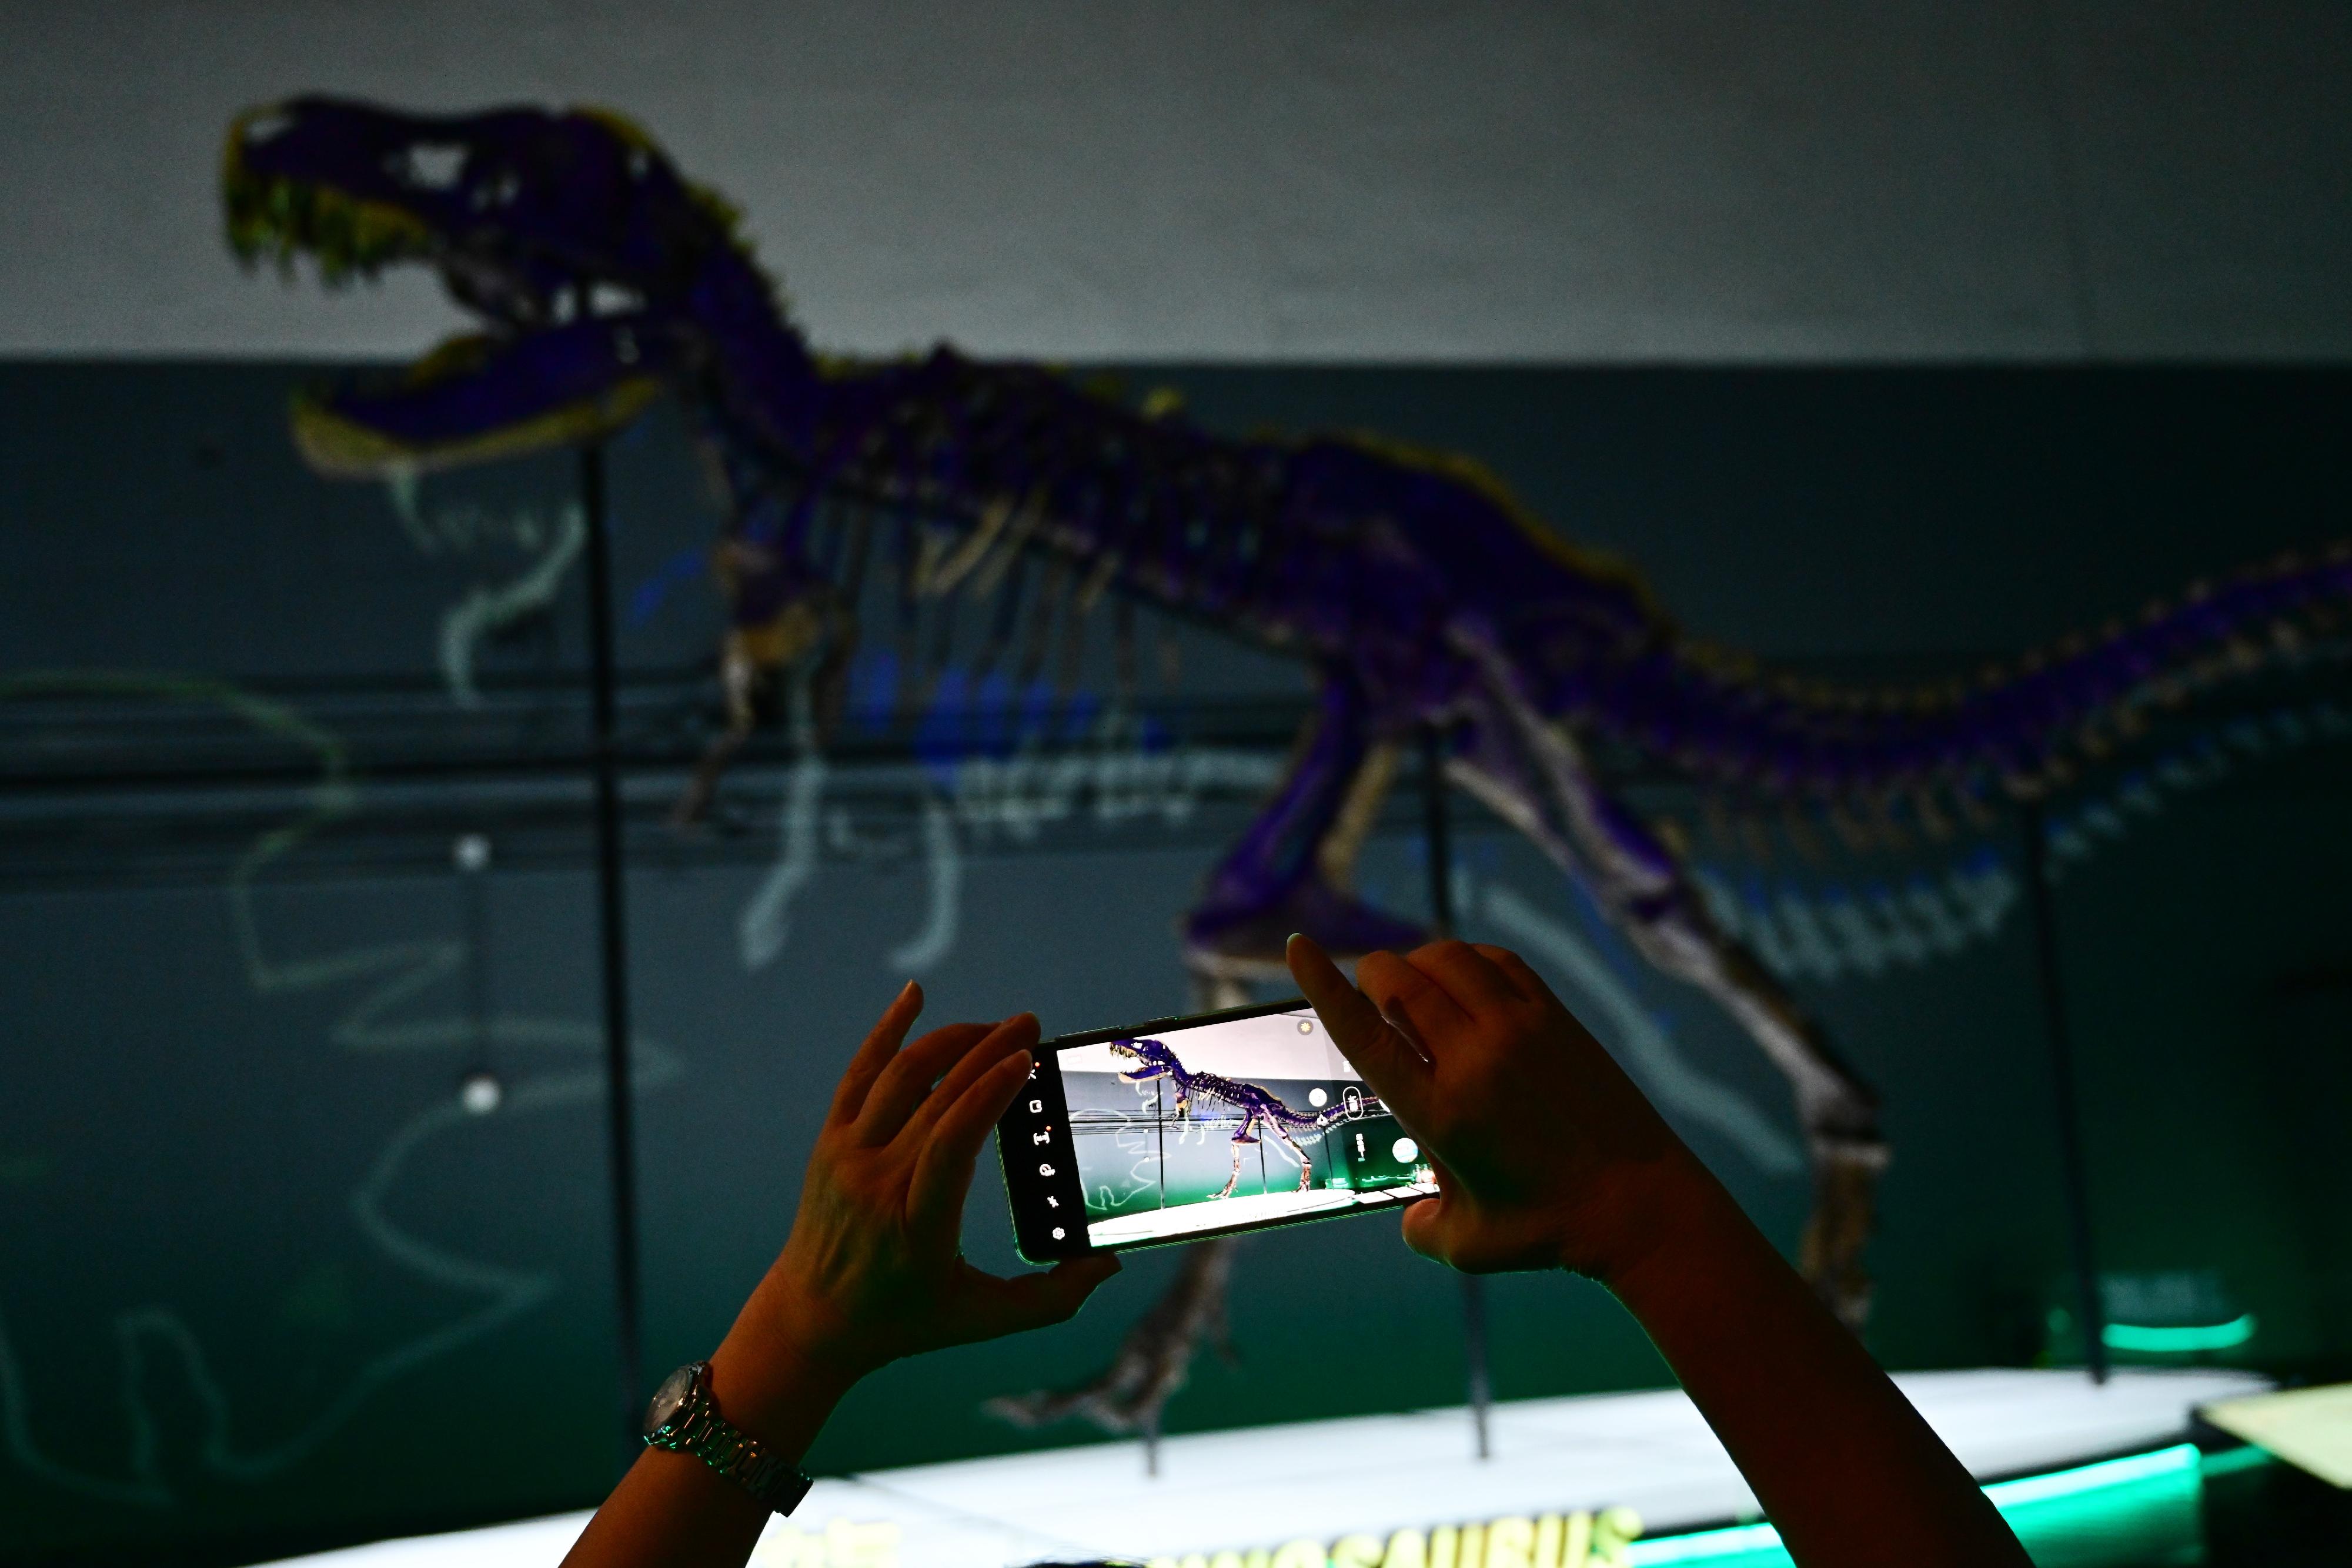 The free large-scale dinosaur exhibition "The Hong Kong Jockey Club Series: The Big Eight - Dinosaur Revelation" organised by the Hong Kong Science Museum has been receiving an overwhelming response from the public since its opening. The museum will extend the exhibition period to February 22, 2023. Picture shows a visitor taking a photo of the popular tyrannosaurus fossil skeleton in the exhibition gallery.